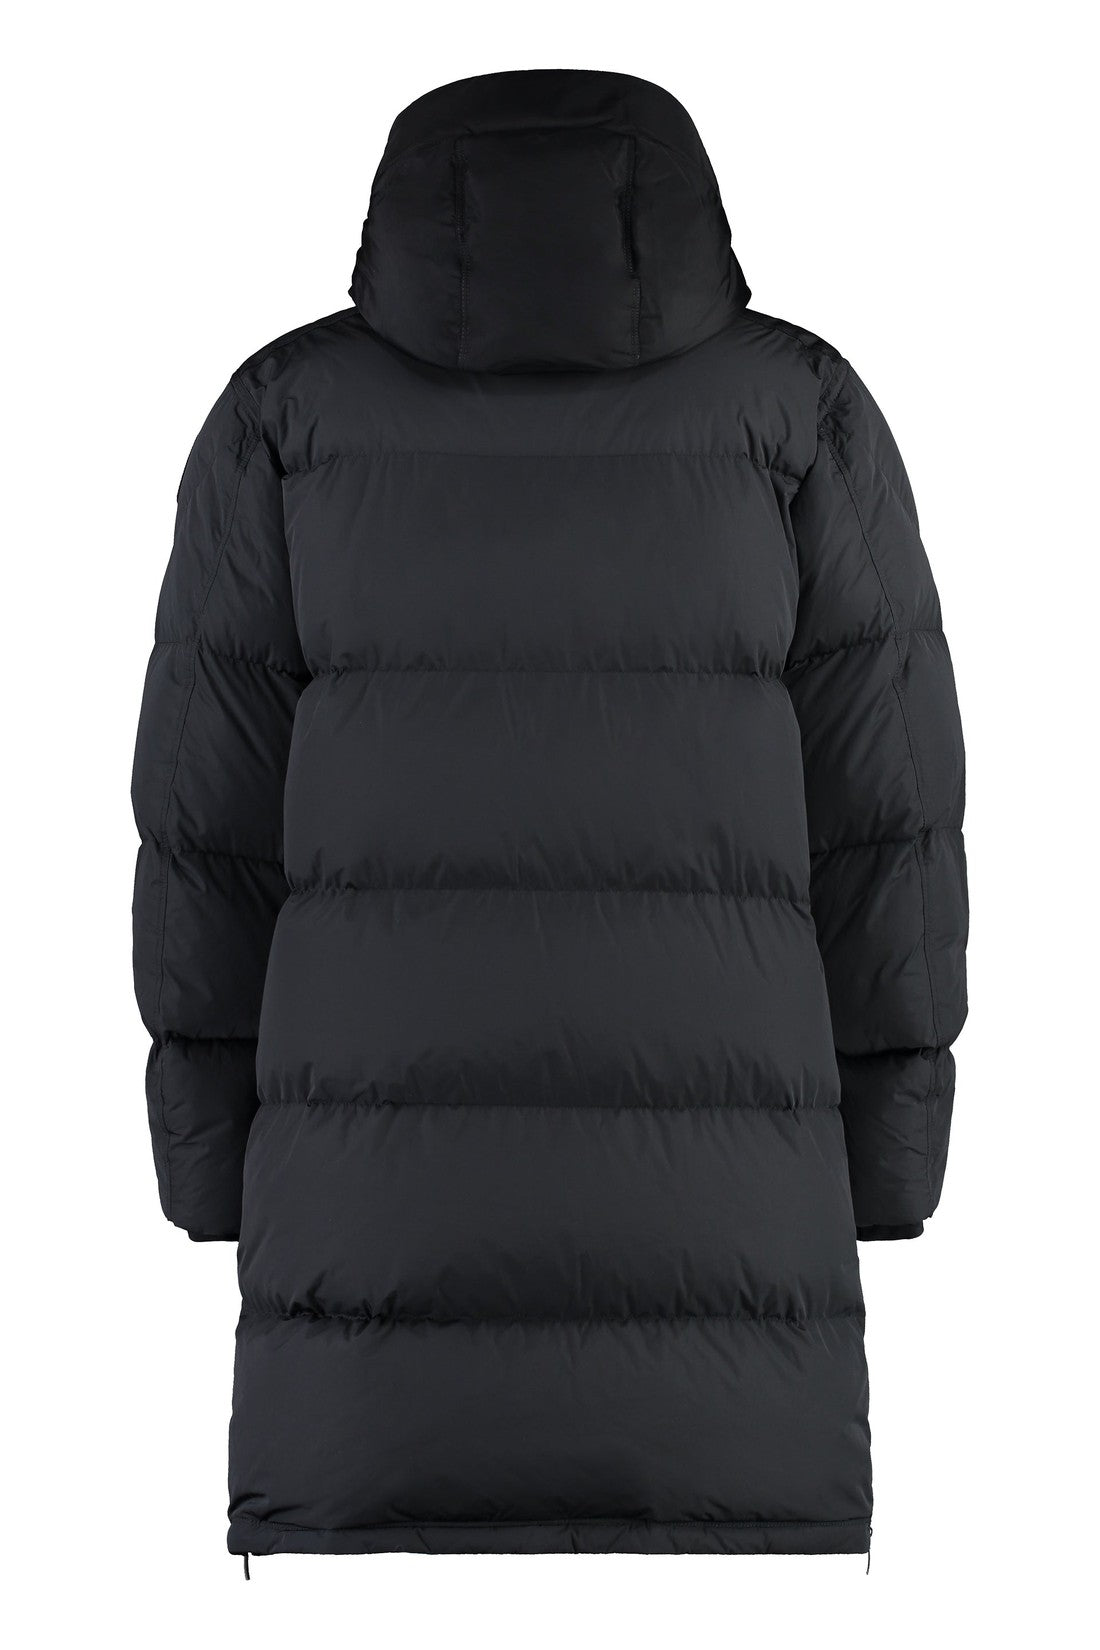 Parajumpers-OUTLET-SALE-Long Bear long hooded down jacket-ARCHIVIST